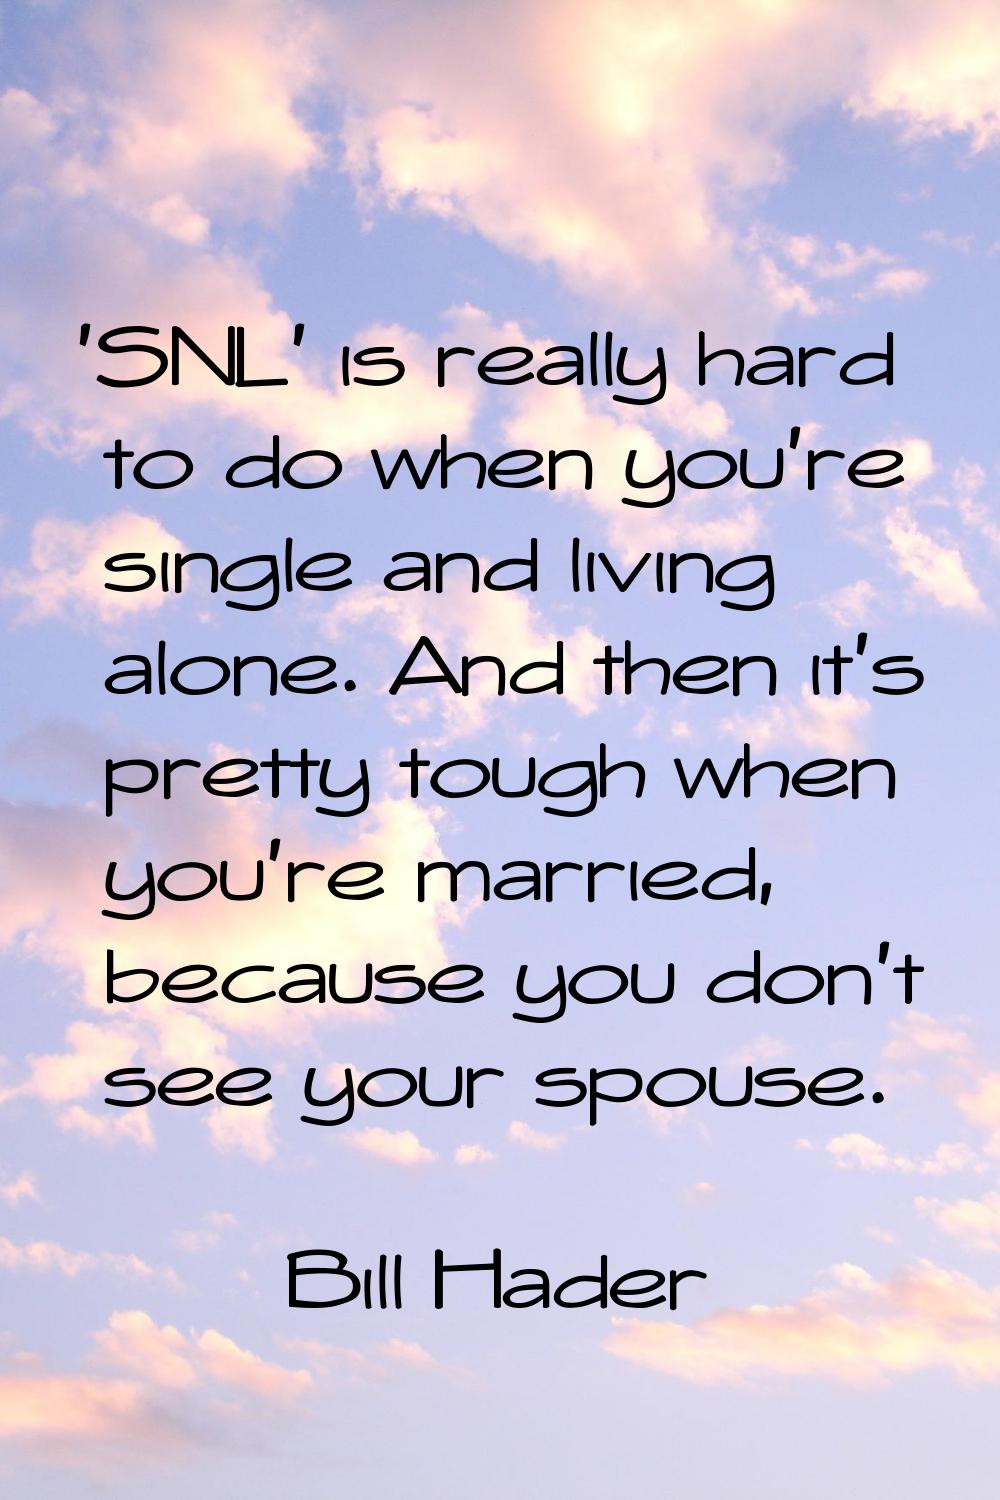 'SNL' is really hard to do when you're single and living alone. And then it's pretty tough when you